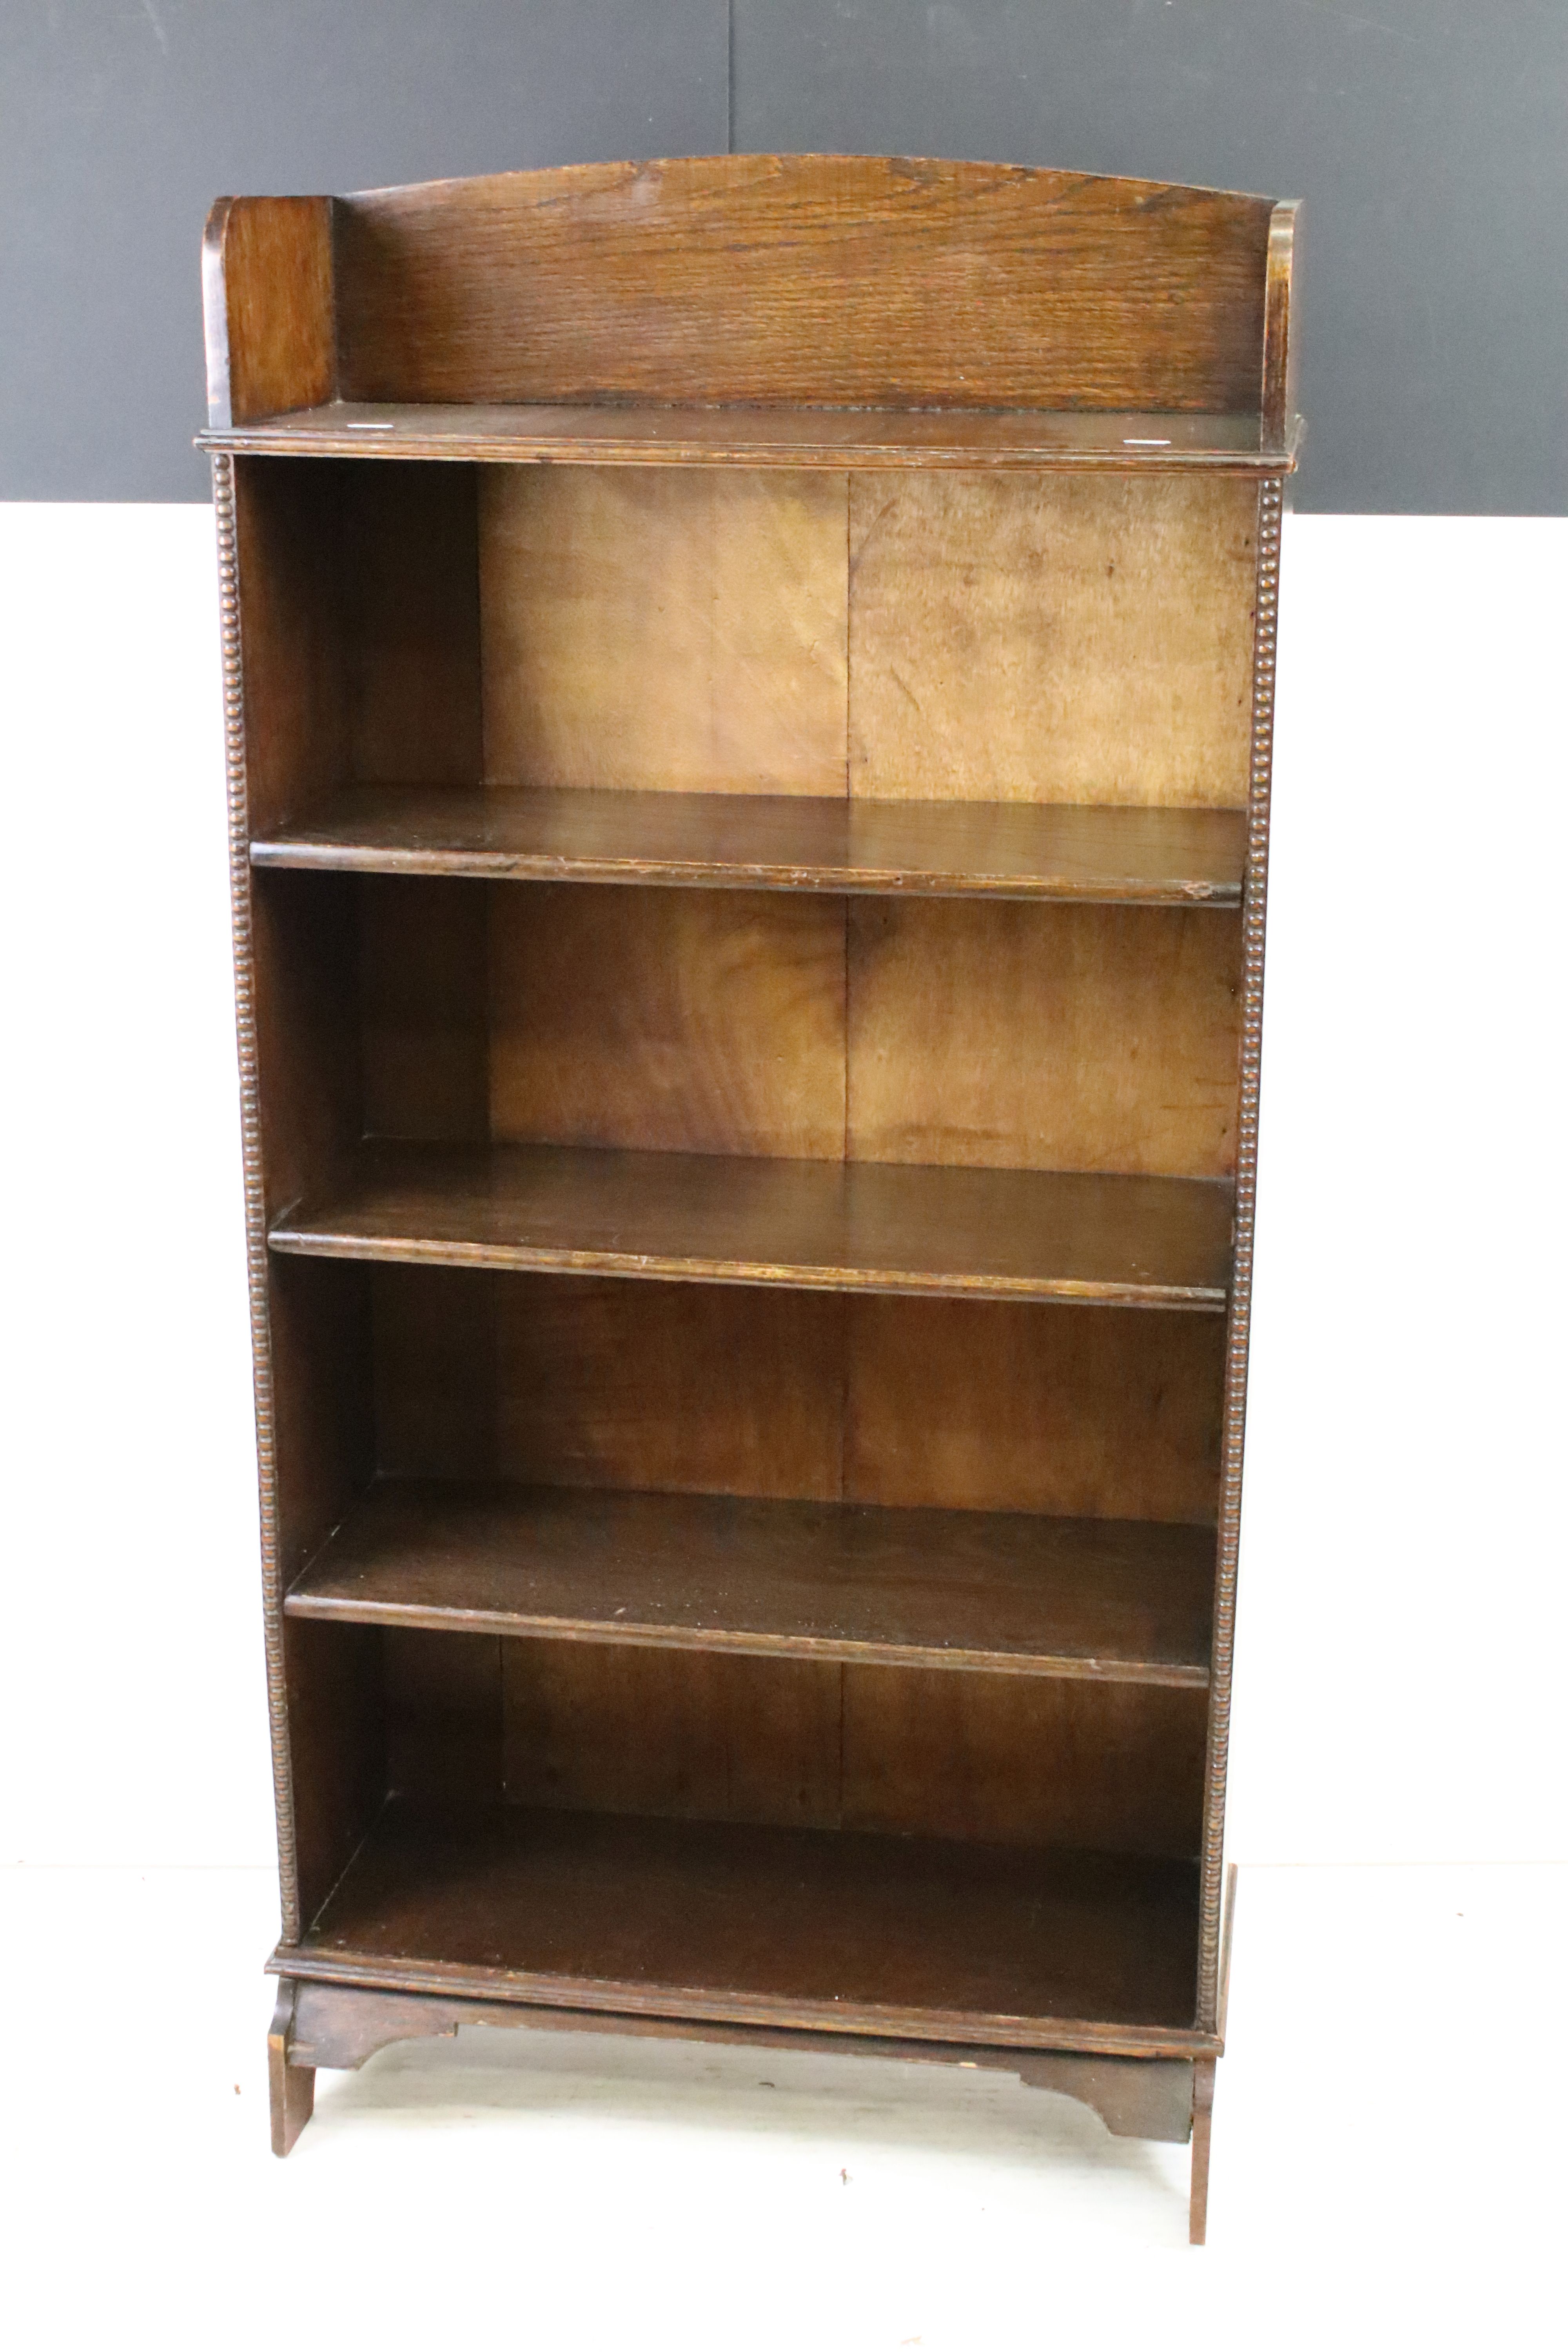 Early to Mid 20th century Oak Bookcase with beaded edge and five fixed shelves, 62cm wide x 23cm